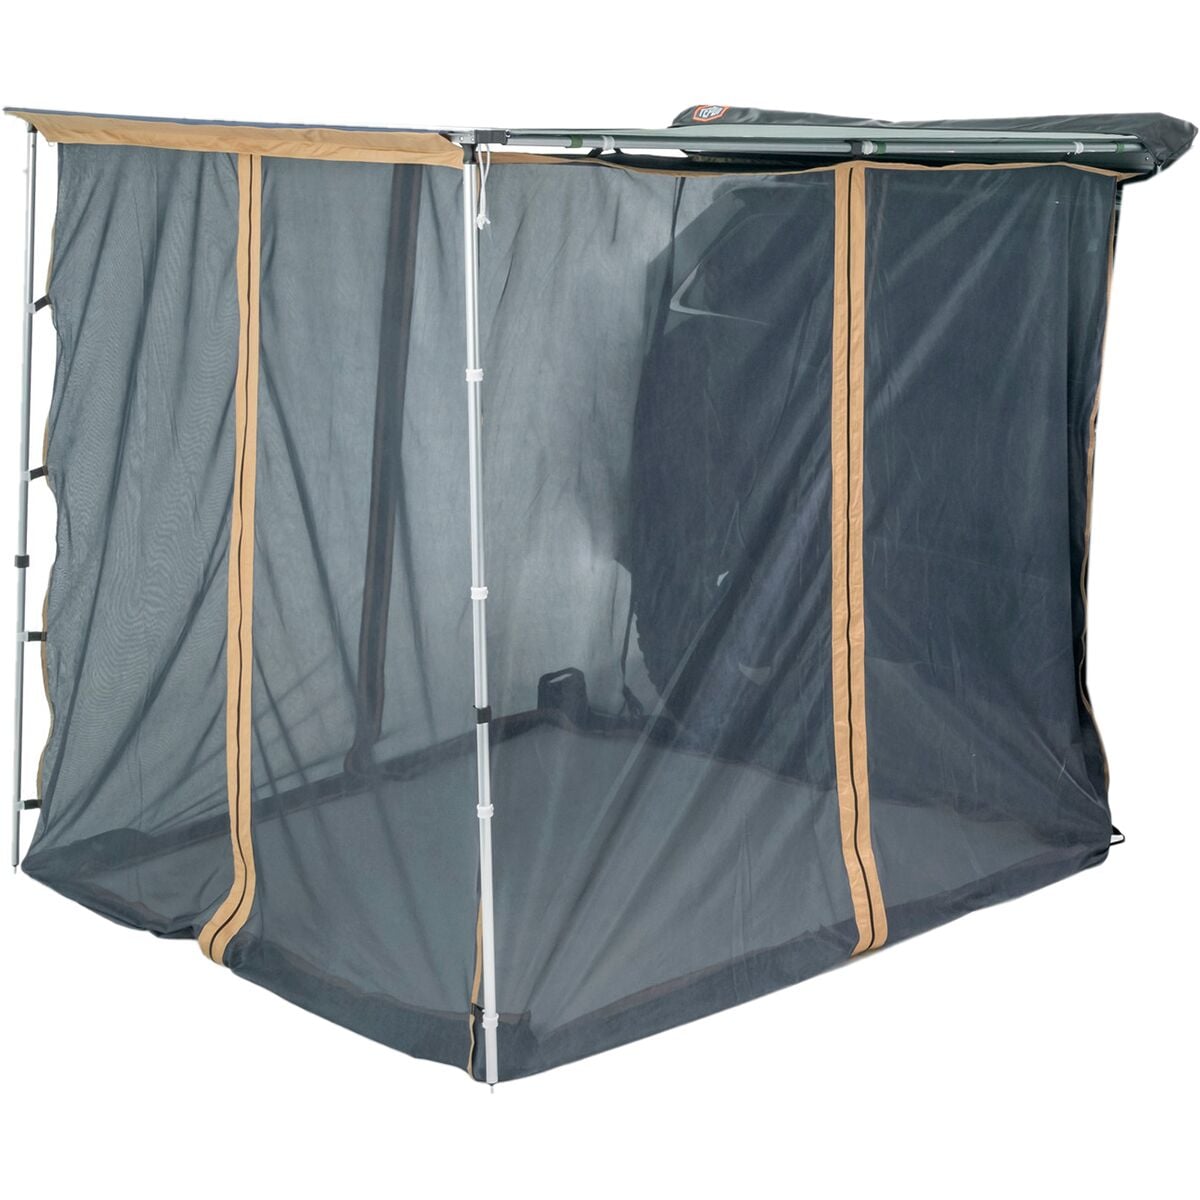 Thule Mosquito Net Walls for 6ft Awning